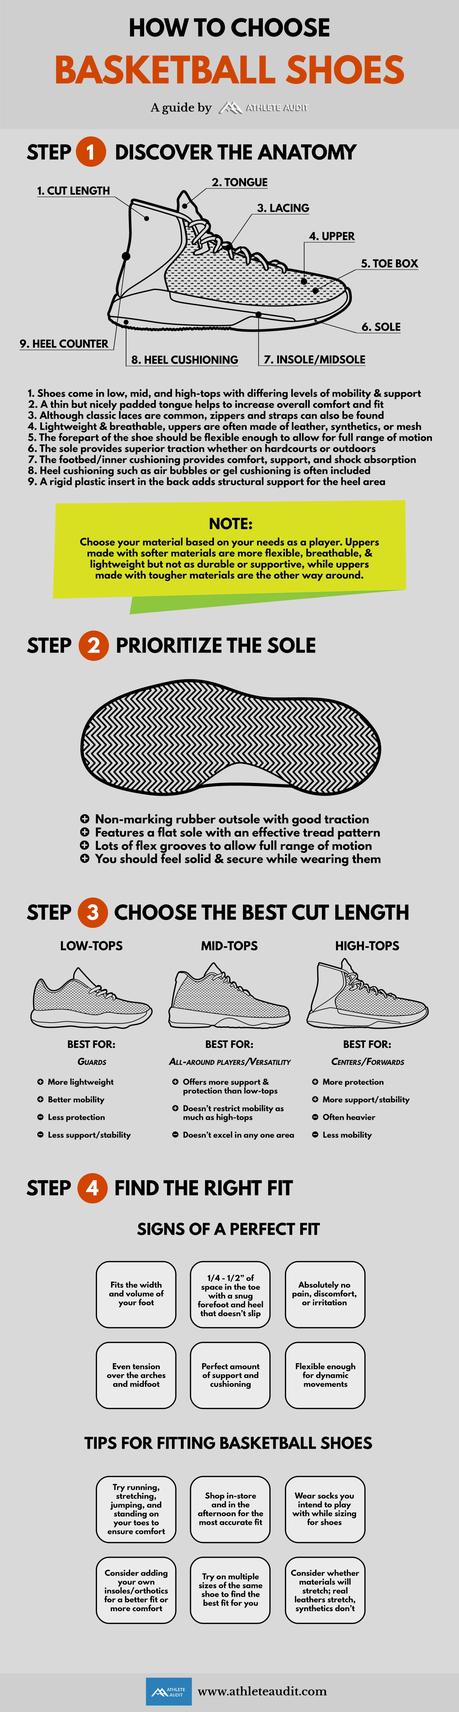 How to Choose Basketball Shoes - Infographic - Athlete Audit